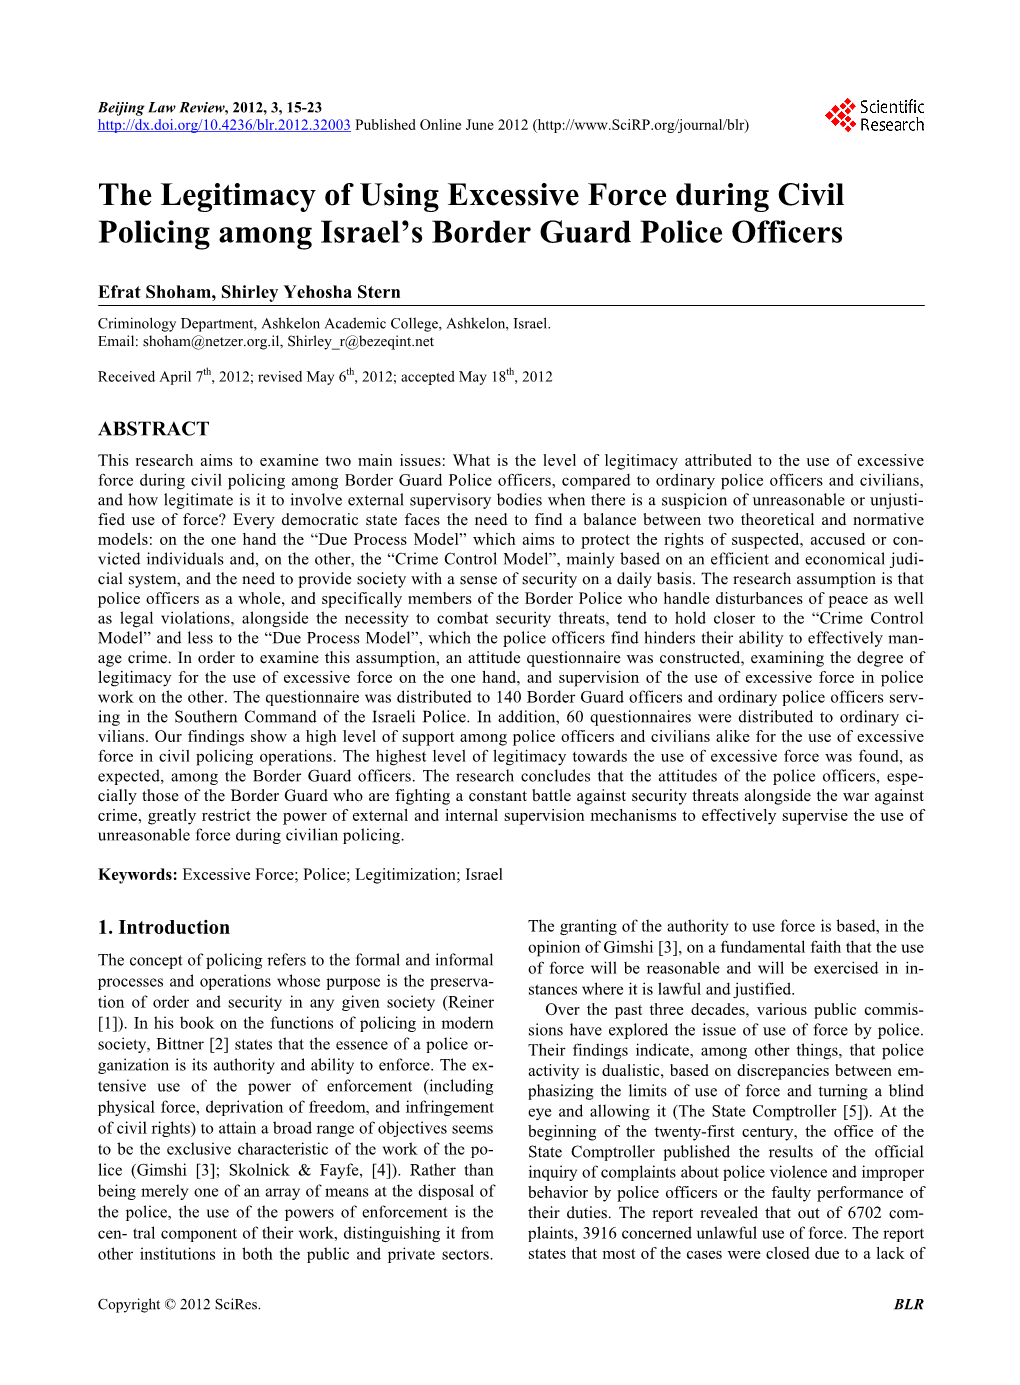 The Legitimacy of Using Excessive Force During Civil Policing Among Israel's Border Guard Police Officers